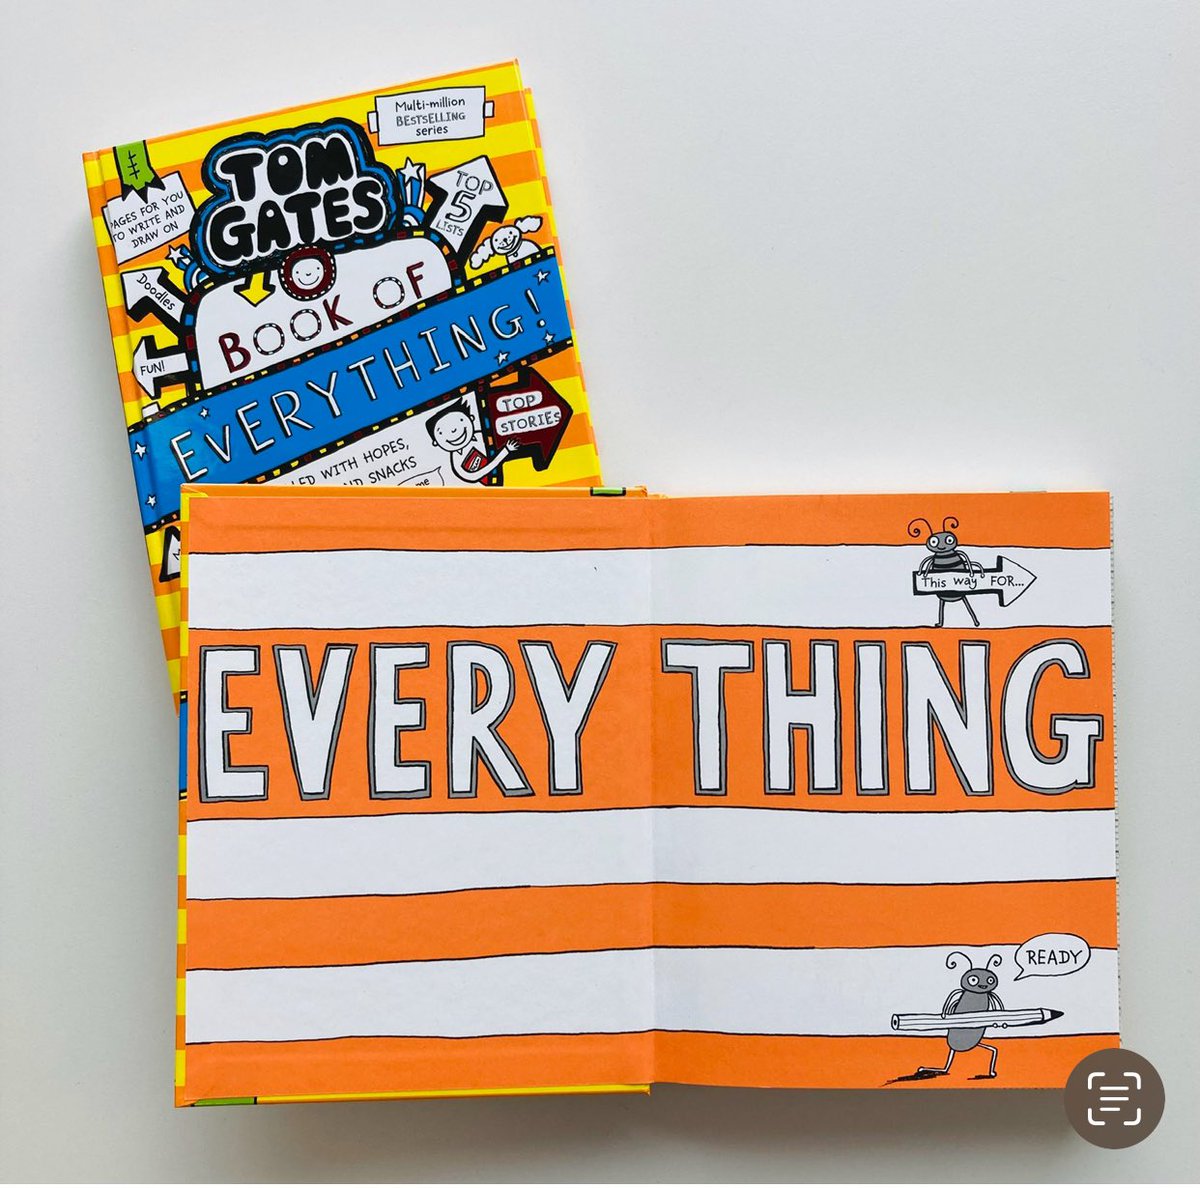 LOOK!👀 First sighting of my BRAND NEW Tom Gates book out 9th May seen at @scholasticuk towers. Contains stories, things to MAKE, DRAW and DO. Perfect for half term and holidays to FILL up with your own fun stuff. #TomGatesBooks #BookOfEverything #TomGatesWorld